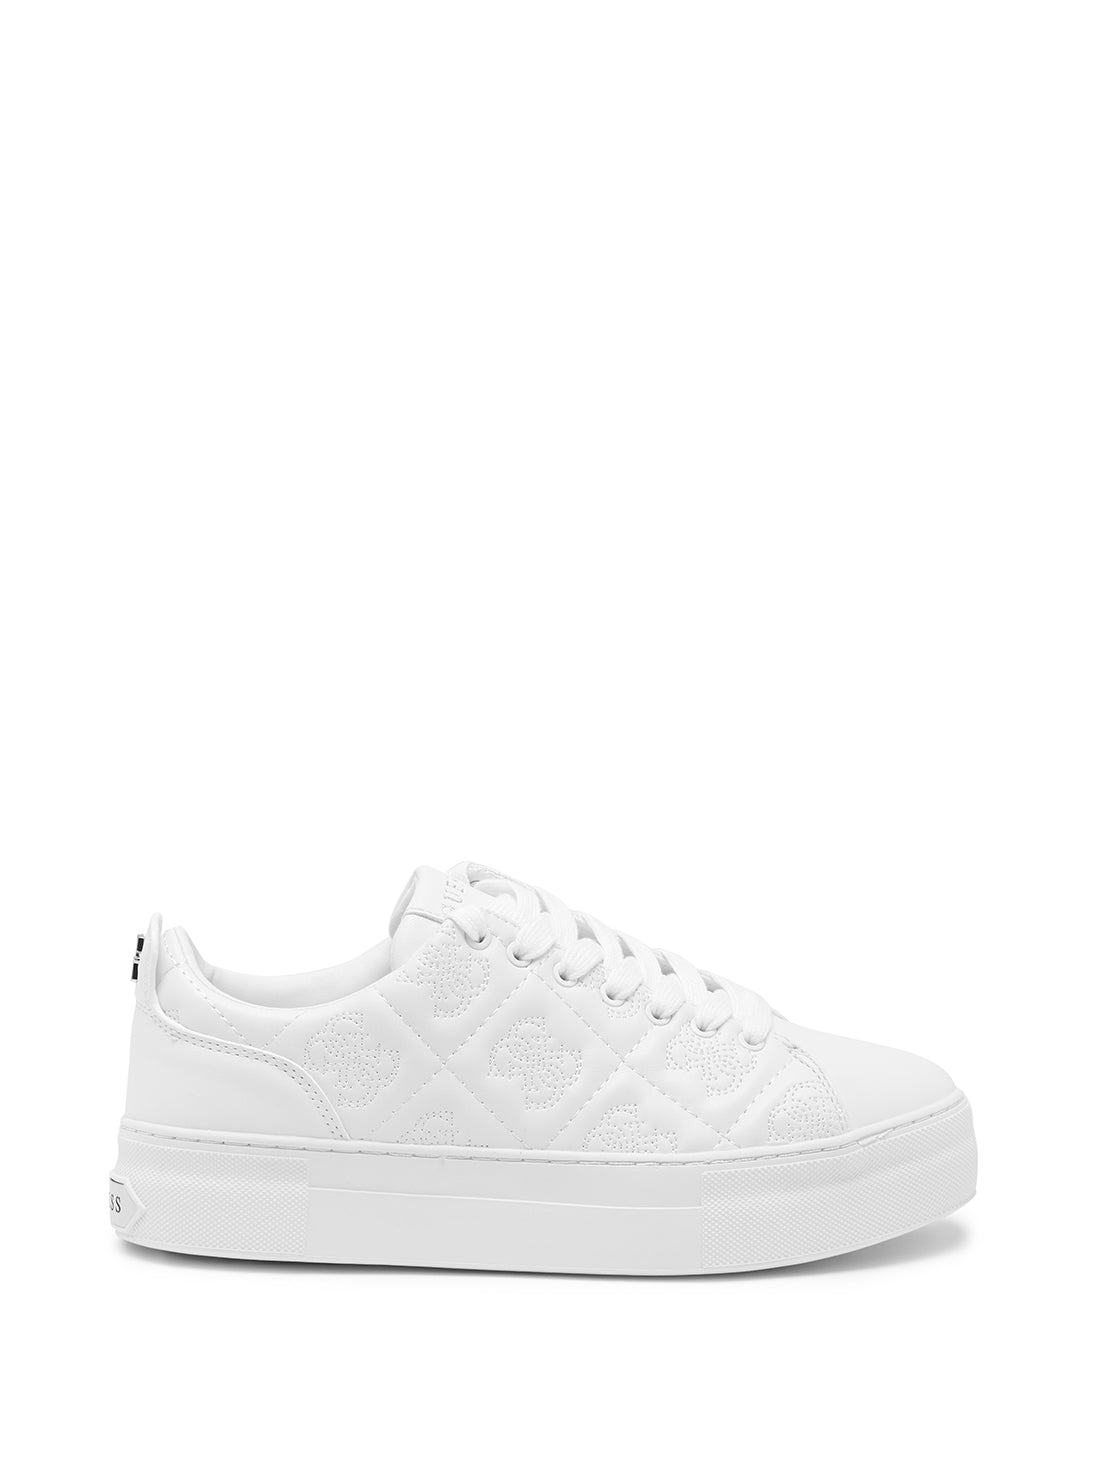 guess womens White Quilted Quattro G Gianele Low-Top Sneakers side view